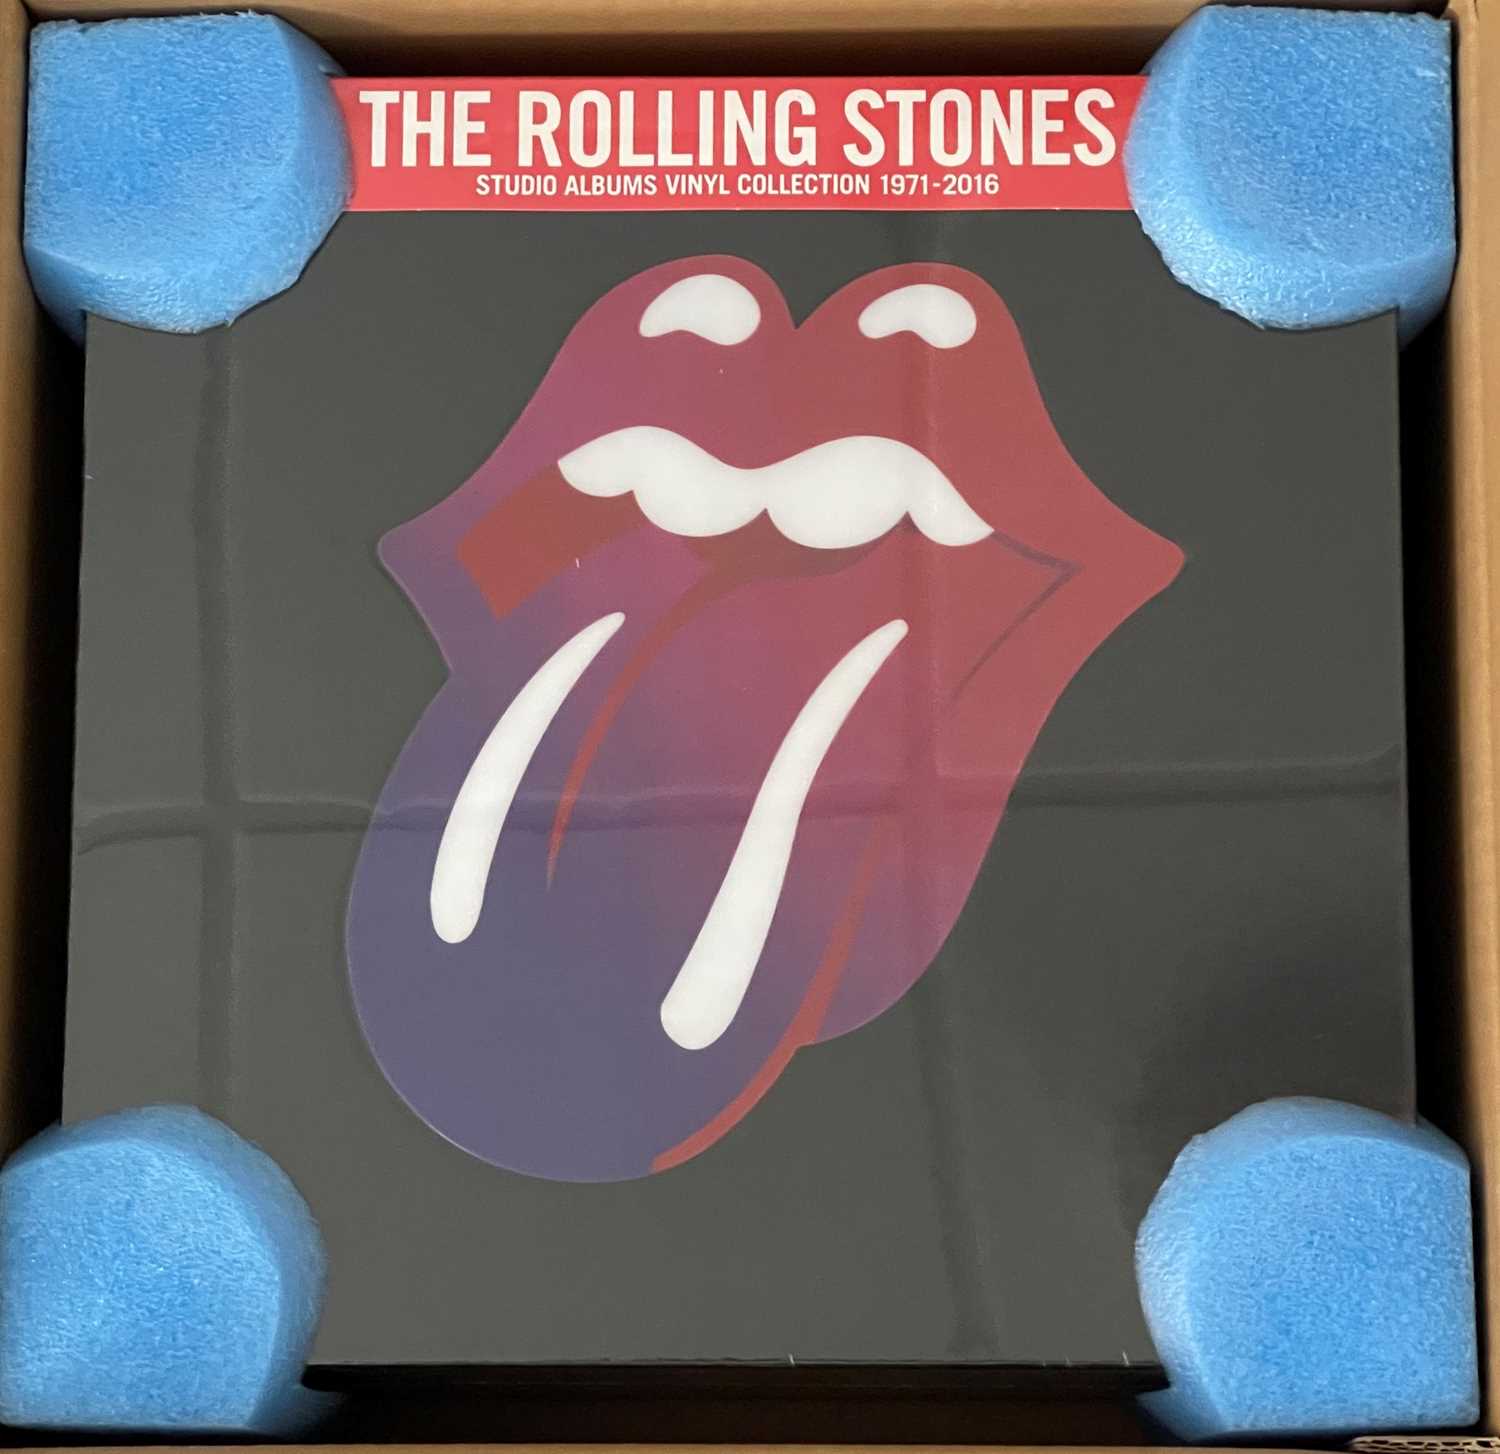 THE ROLLING STONES - STUDIO ALBUMS VINYL COLLECTION 1971-2016 (2018 BOX SET - 602557974867) - Image 2 of 2